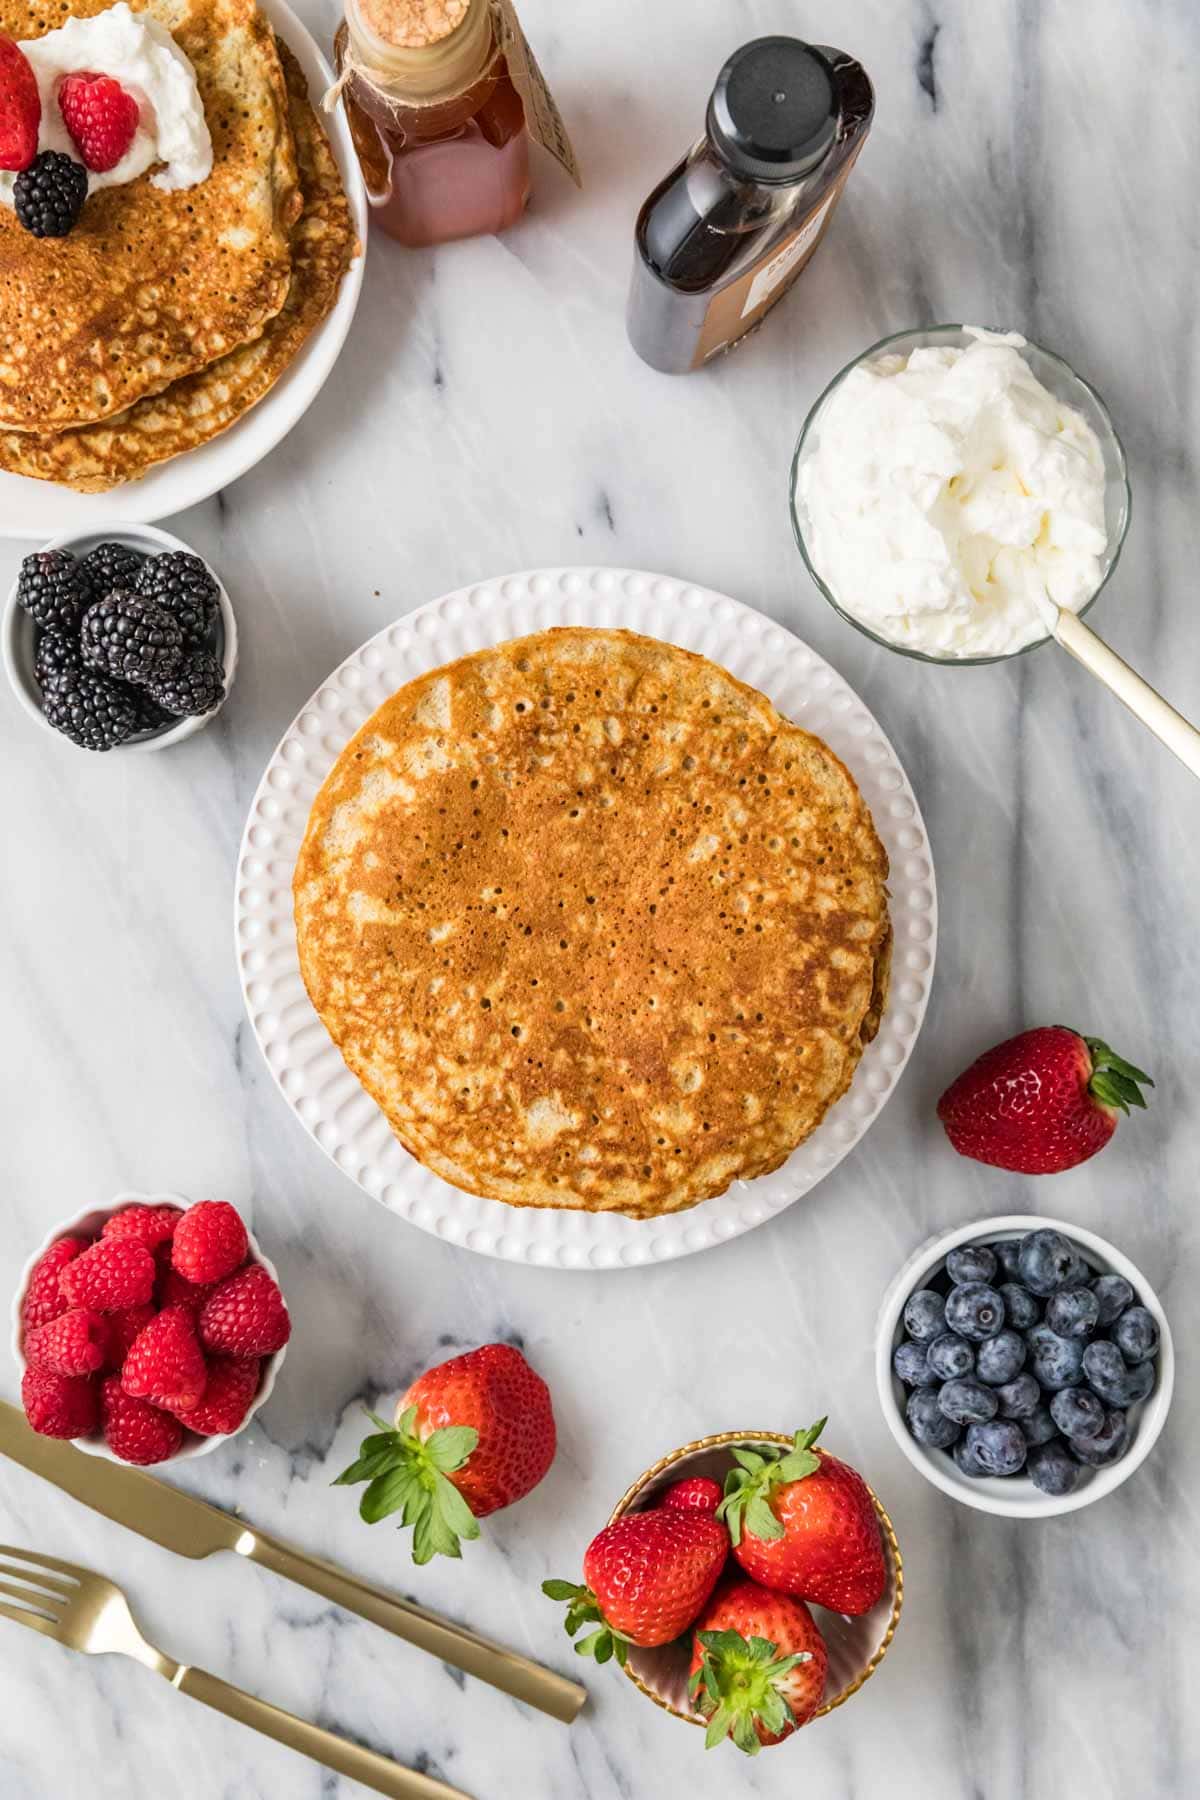 Overhead view of a whole wheat pancake on a plate surrounded by bowls of berries and whipped cream.